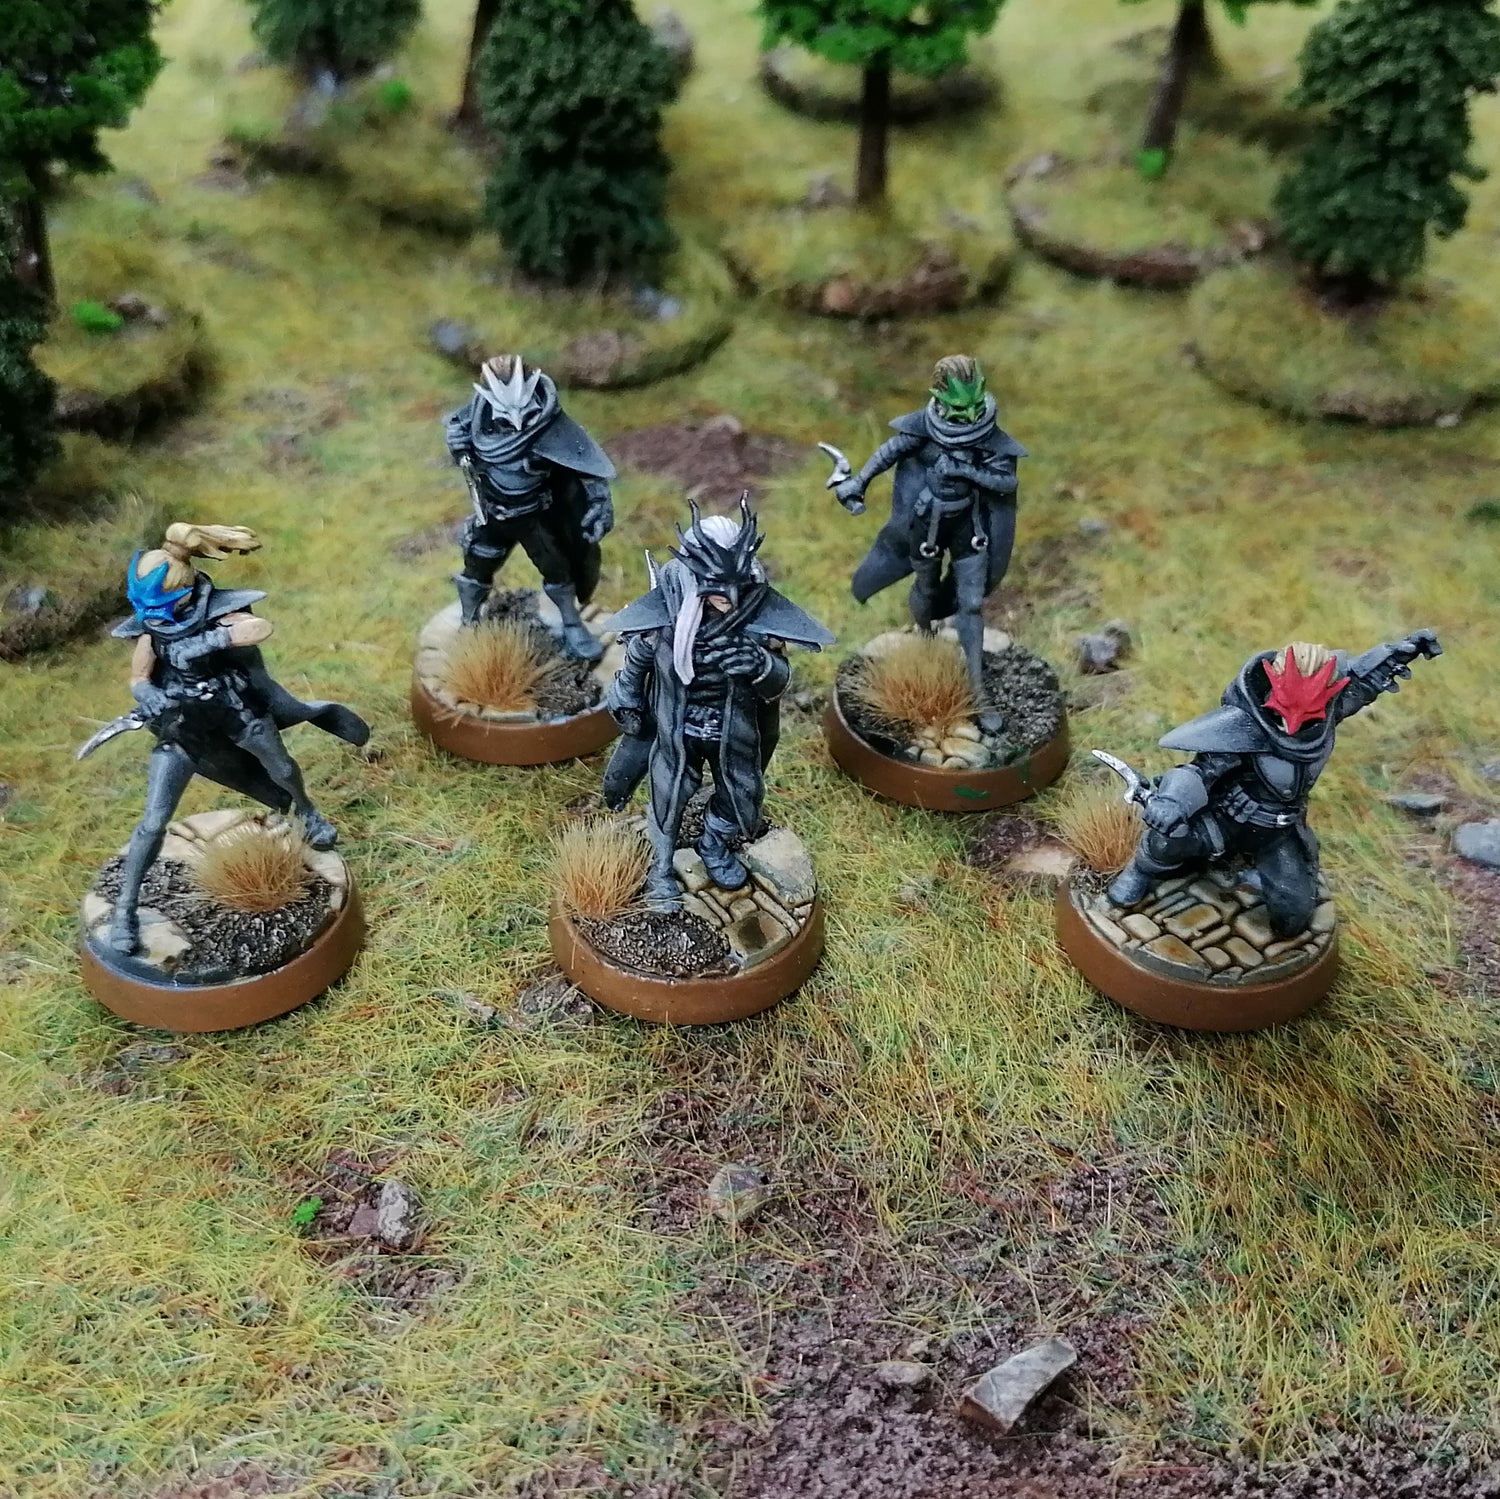 A photograph of painted miniatures of the Cult of Tiamat set of 5 dragon cult assassins